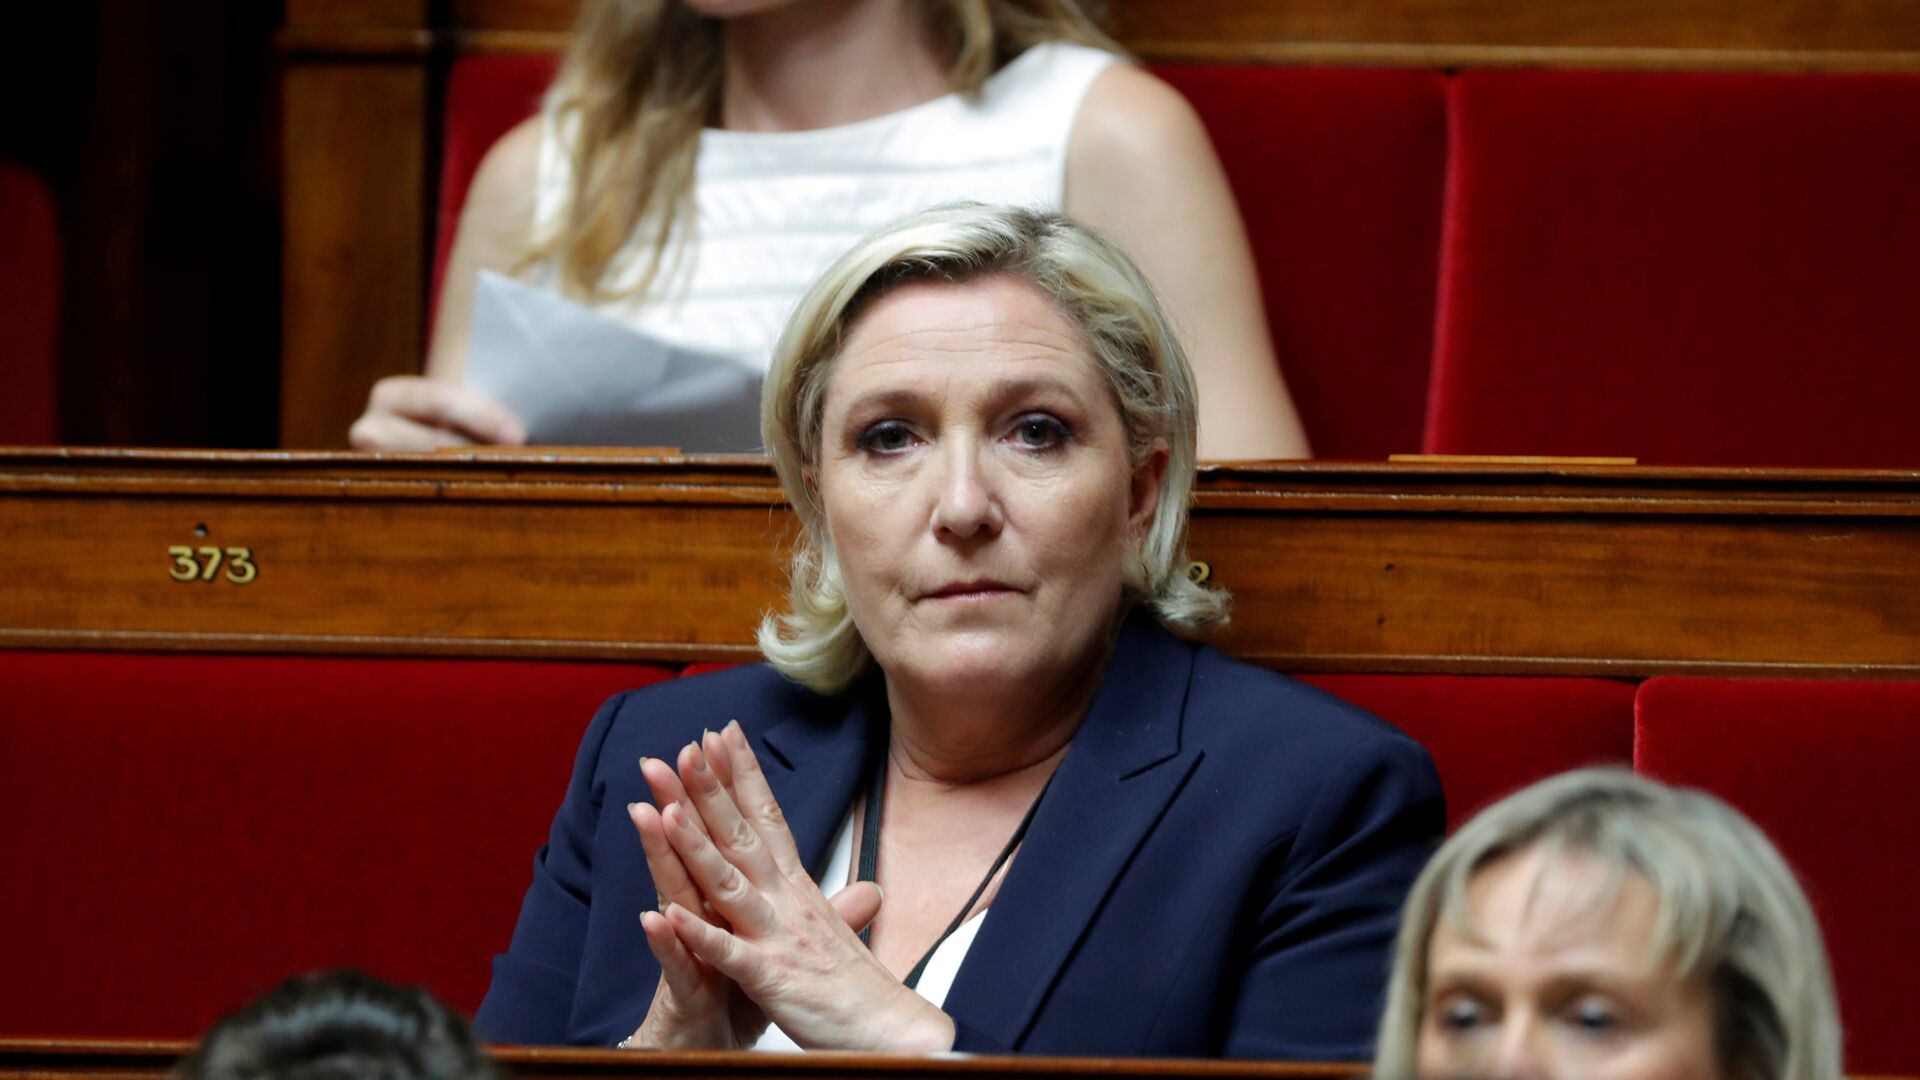 Marine Le Pen of France's National Front (FN) political party at the opening session of the French National Assembly in Paris, France, June 27, 2017 - Sputnik International, 1920, 02.03.2022